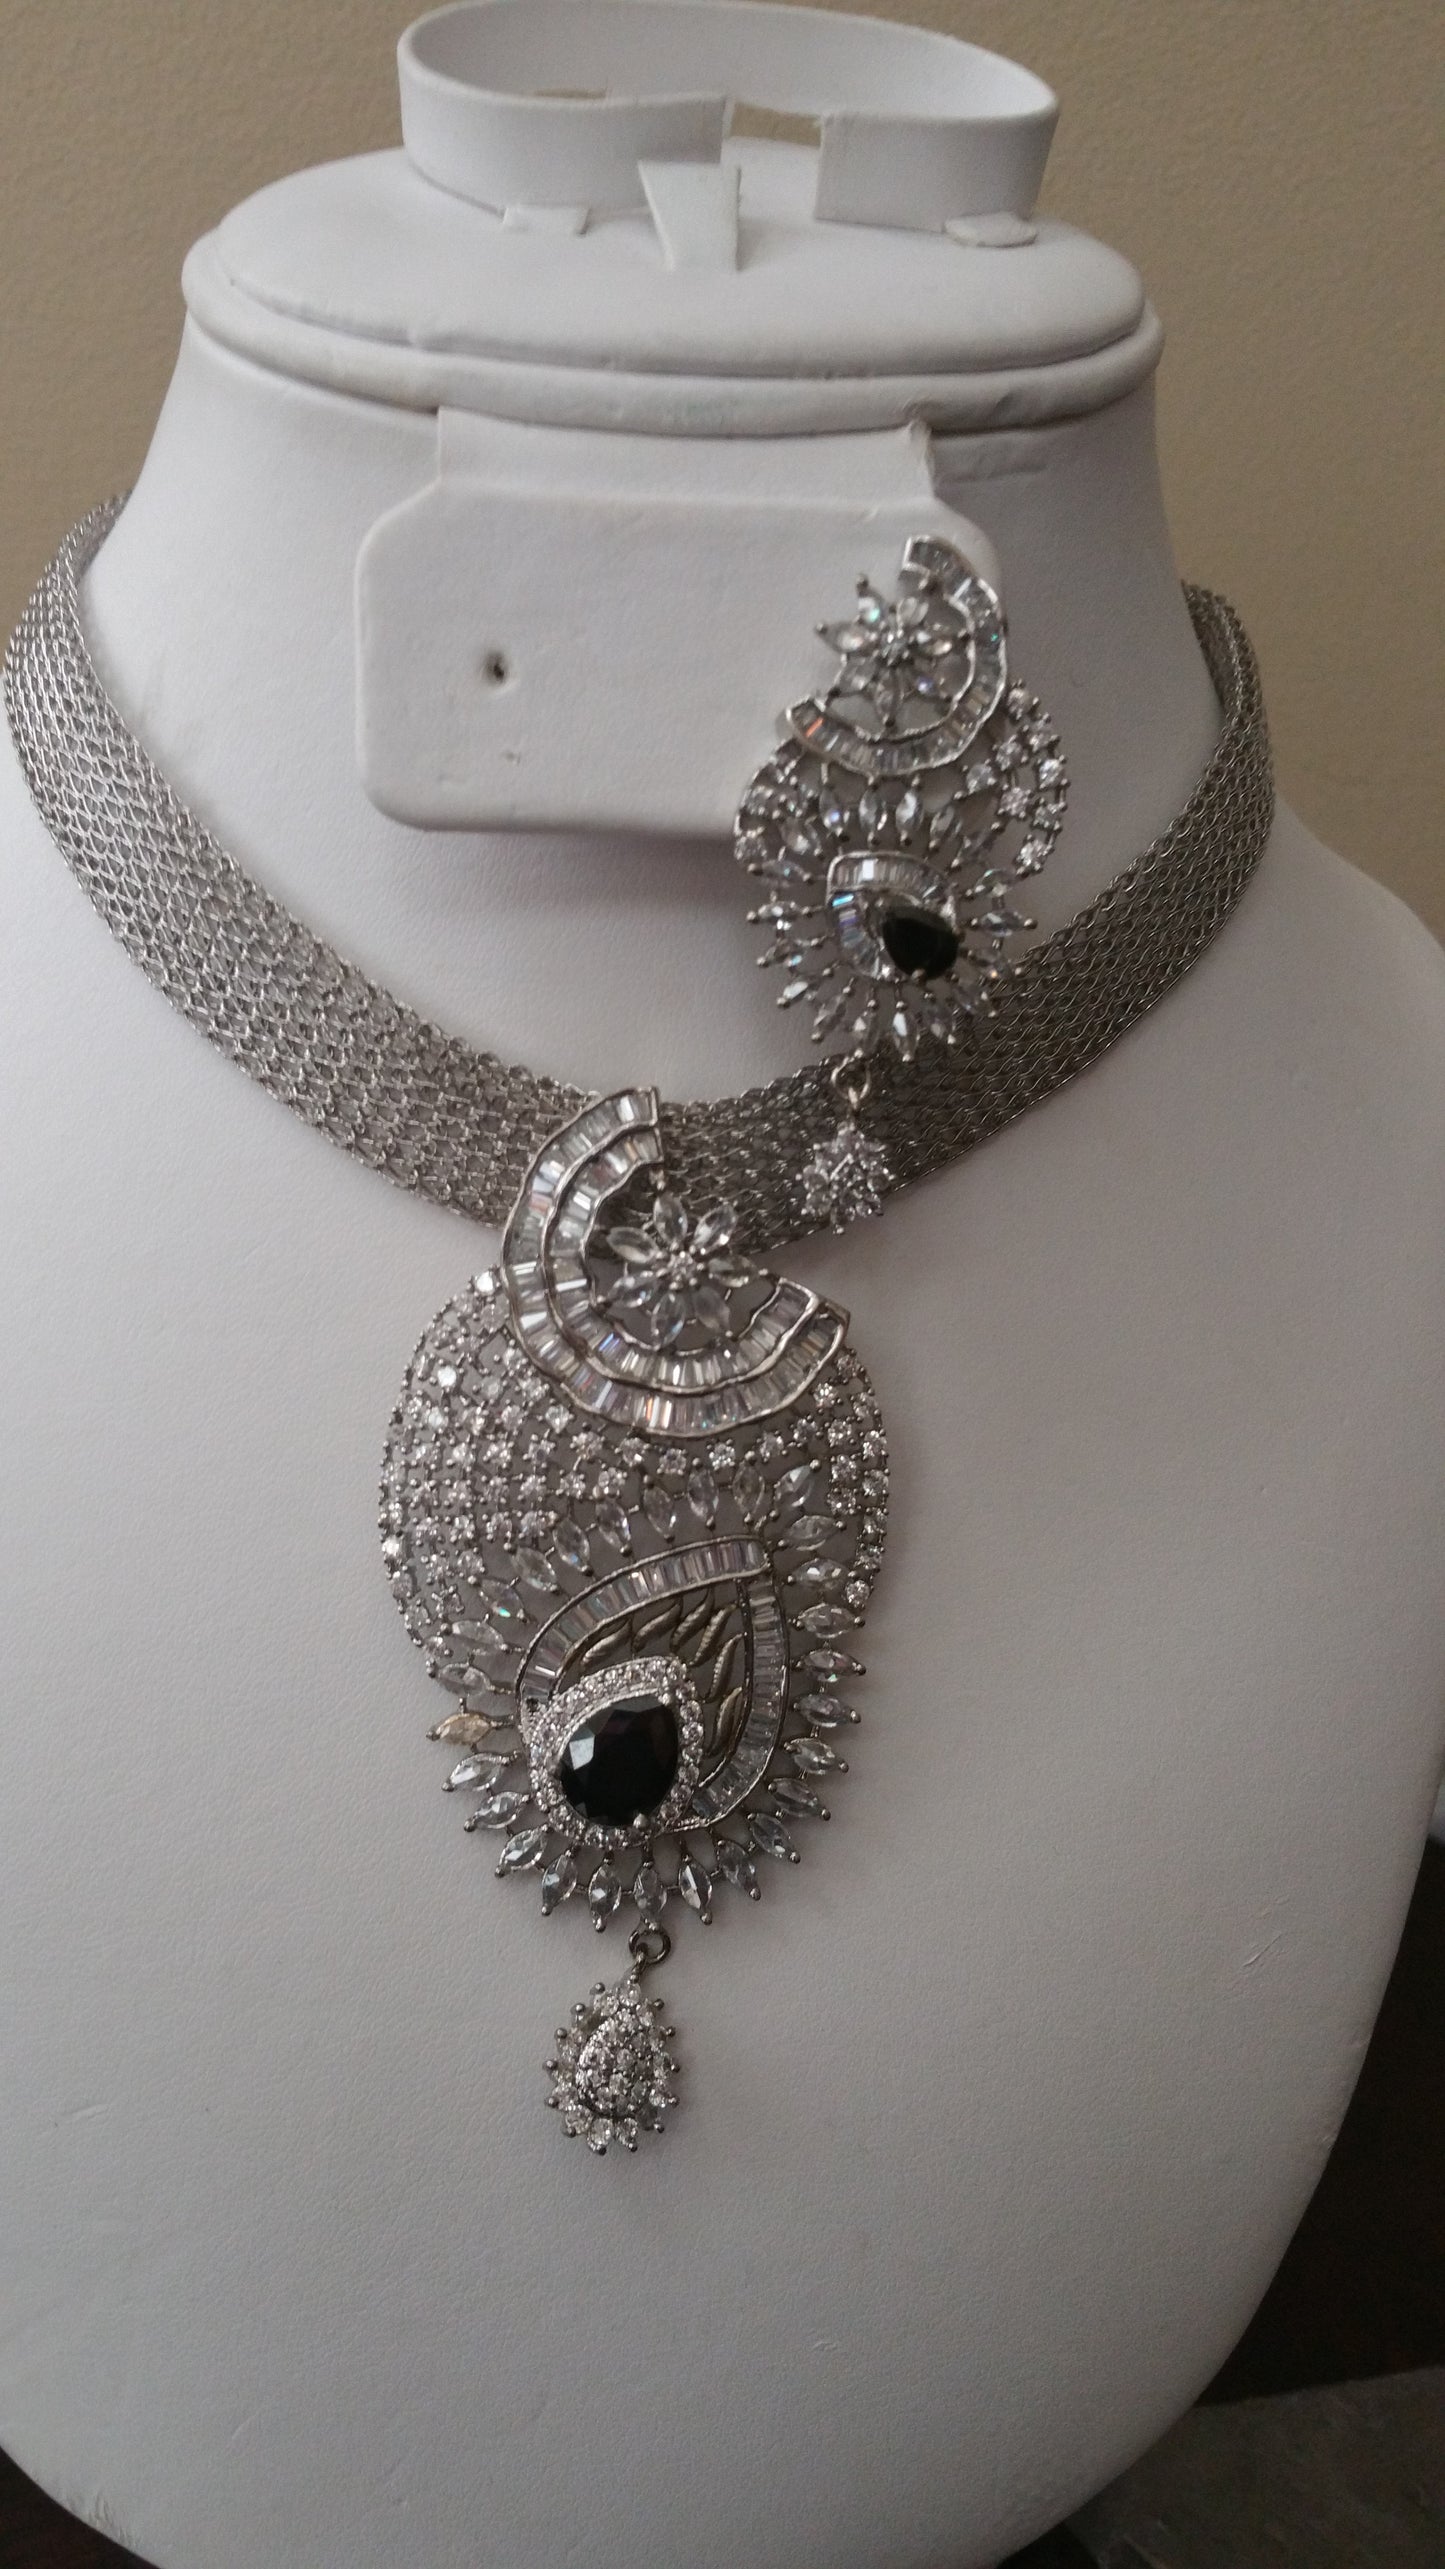 22k electroplated Silver set with CZ stones Jewelry set.  Silver choker/matching earrings. Sold as a set